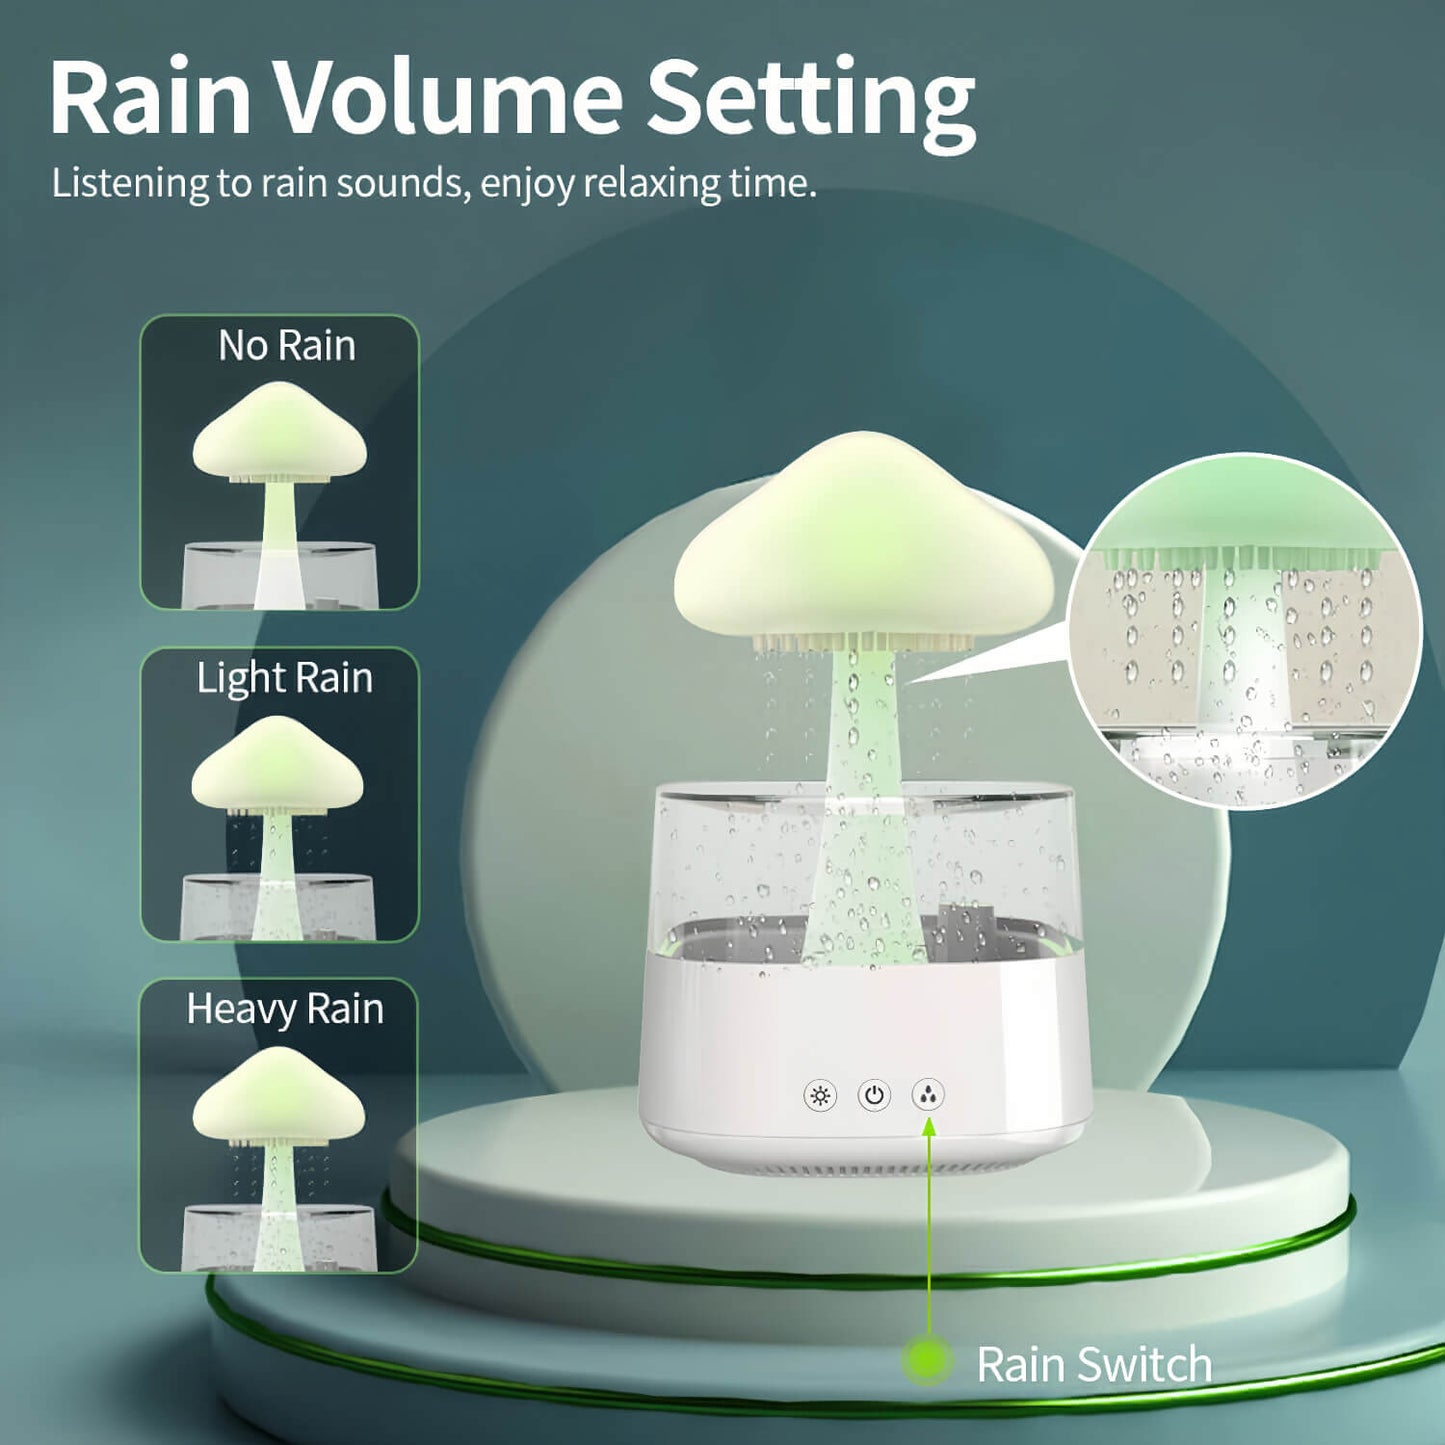 Serene Rain Cloud Diffuser in action, creating a tranquil atmosphere with its raindrop patter.